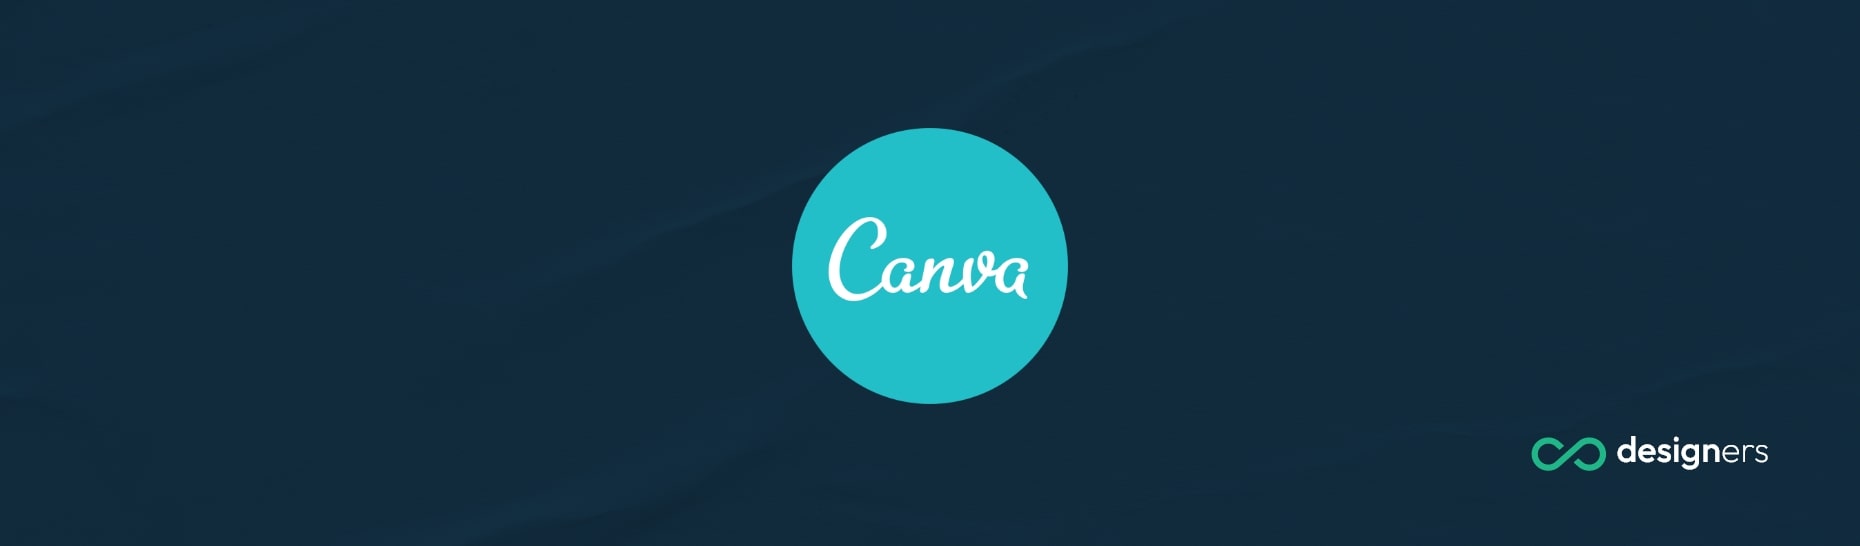 Is It Illegal to Sell Canva Templates?